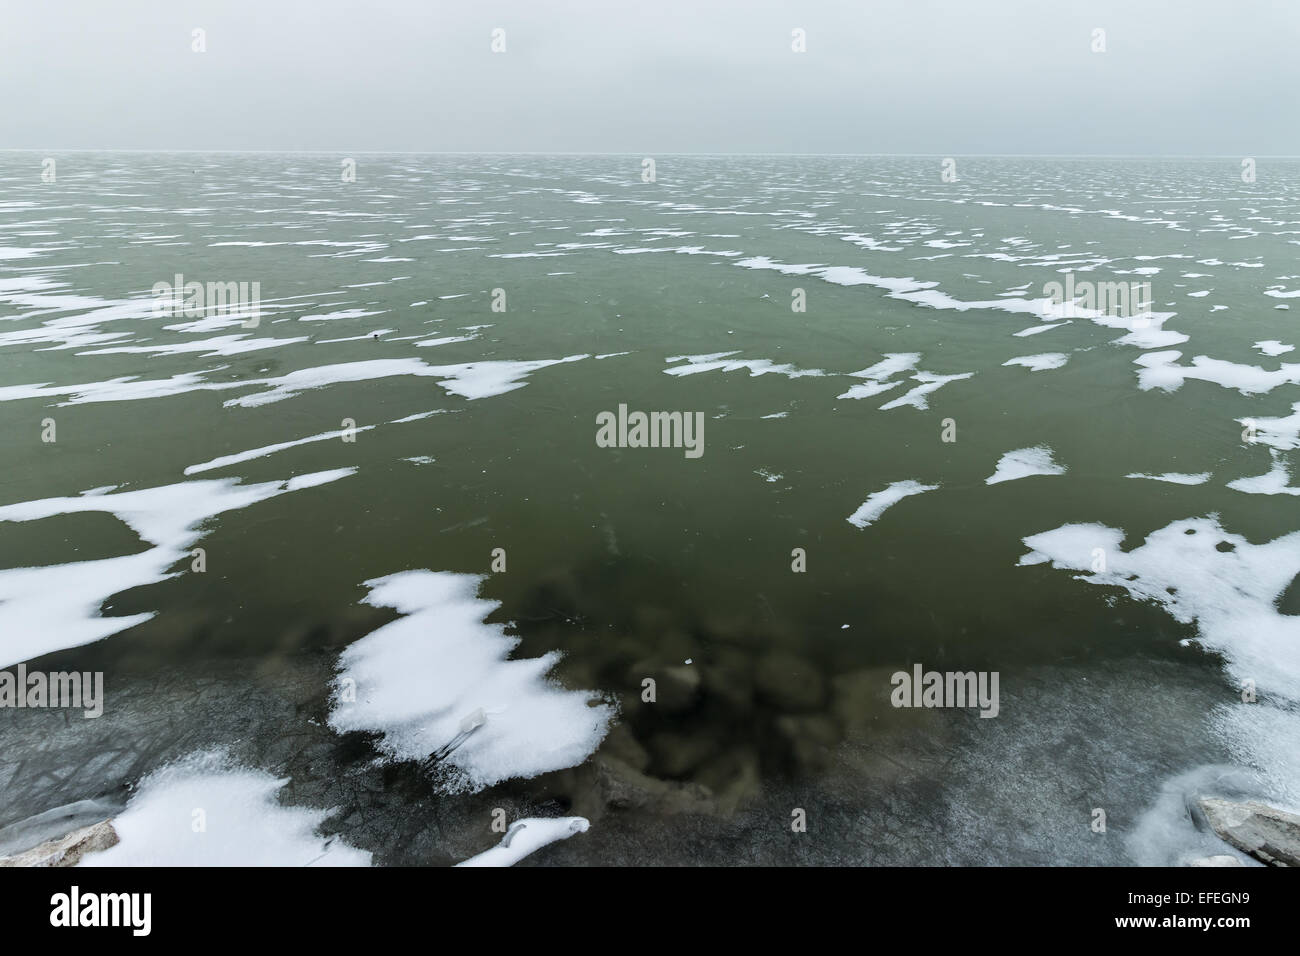 Landscape in winter from a froze lake Stock Photo